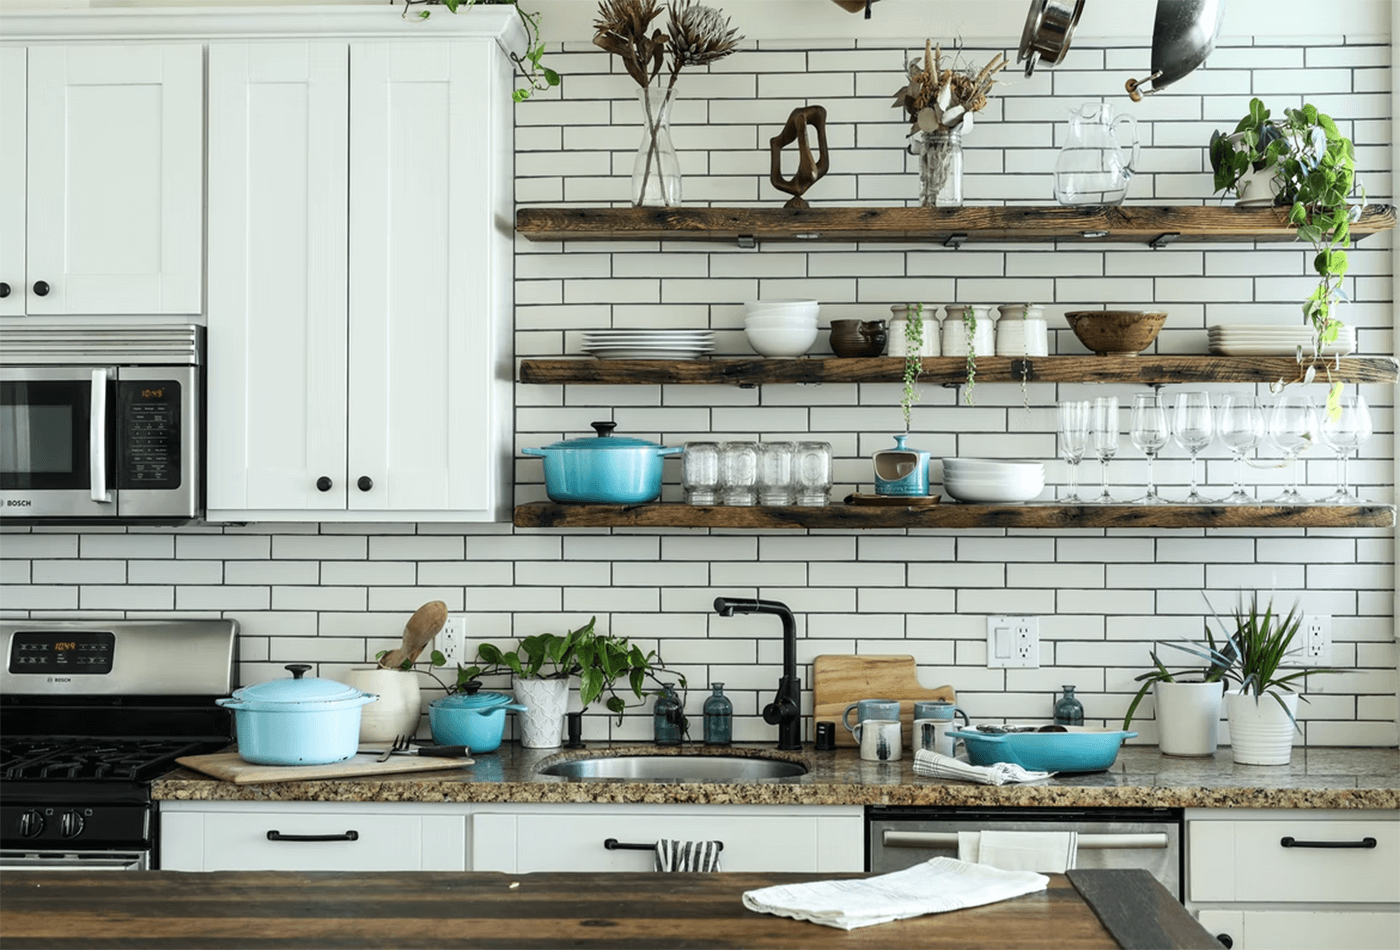 https://dropinblog.net/34246798/files/featured/Floating_Shelves_and_Worktops__Kitchens_That_Look_Magical.png